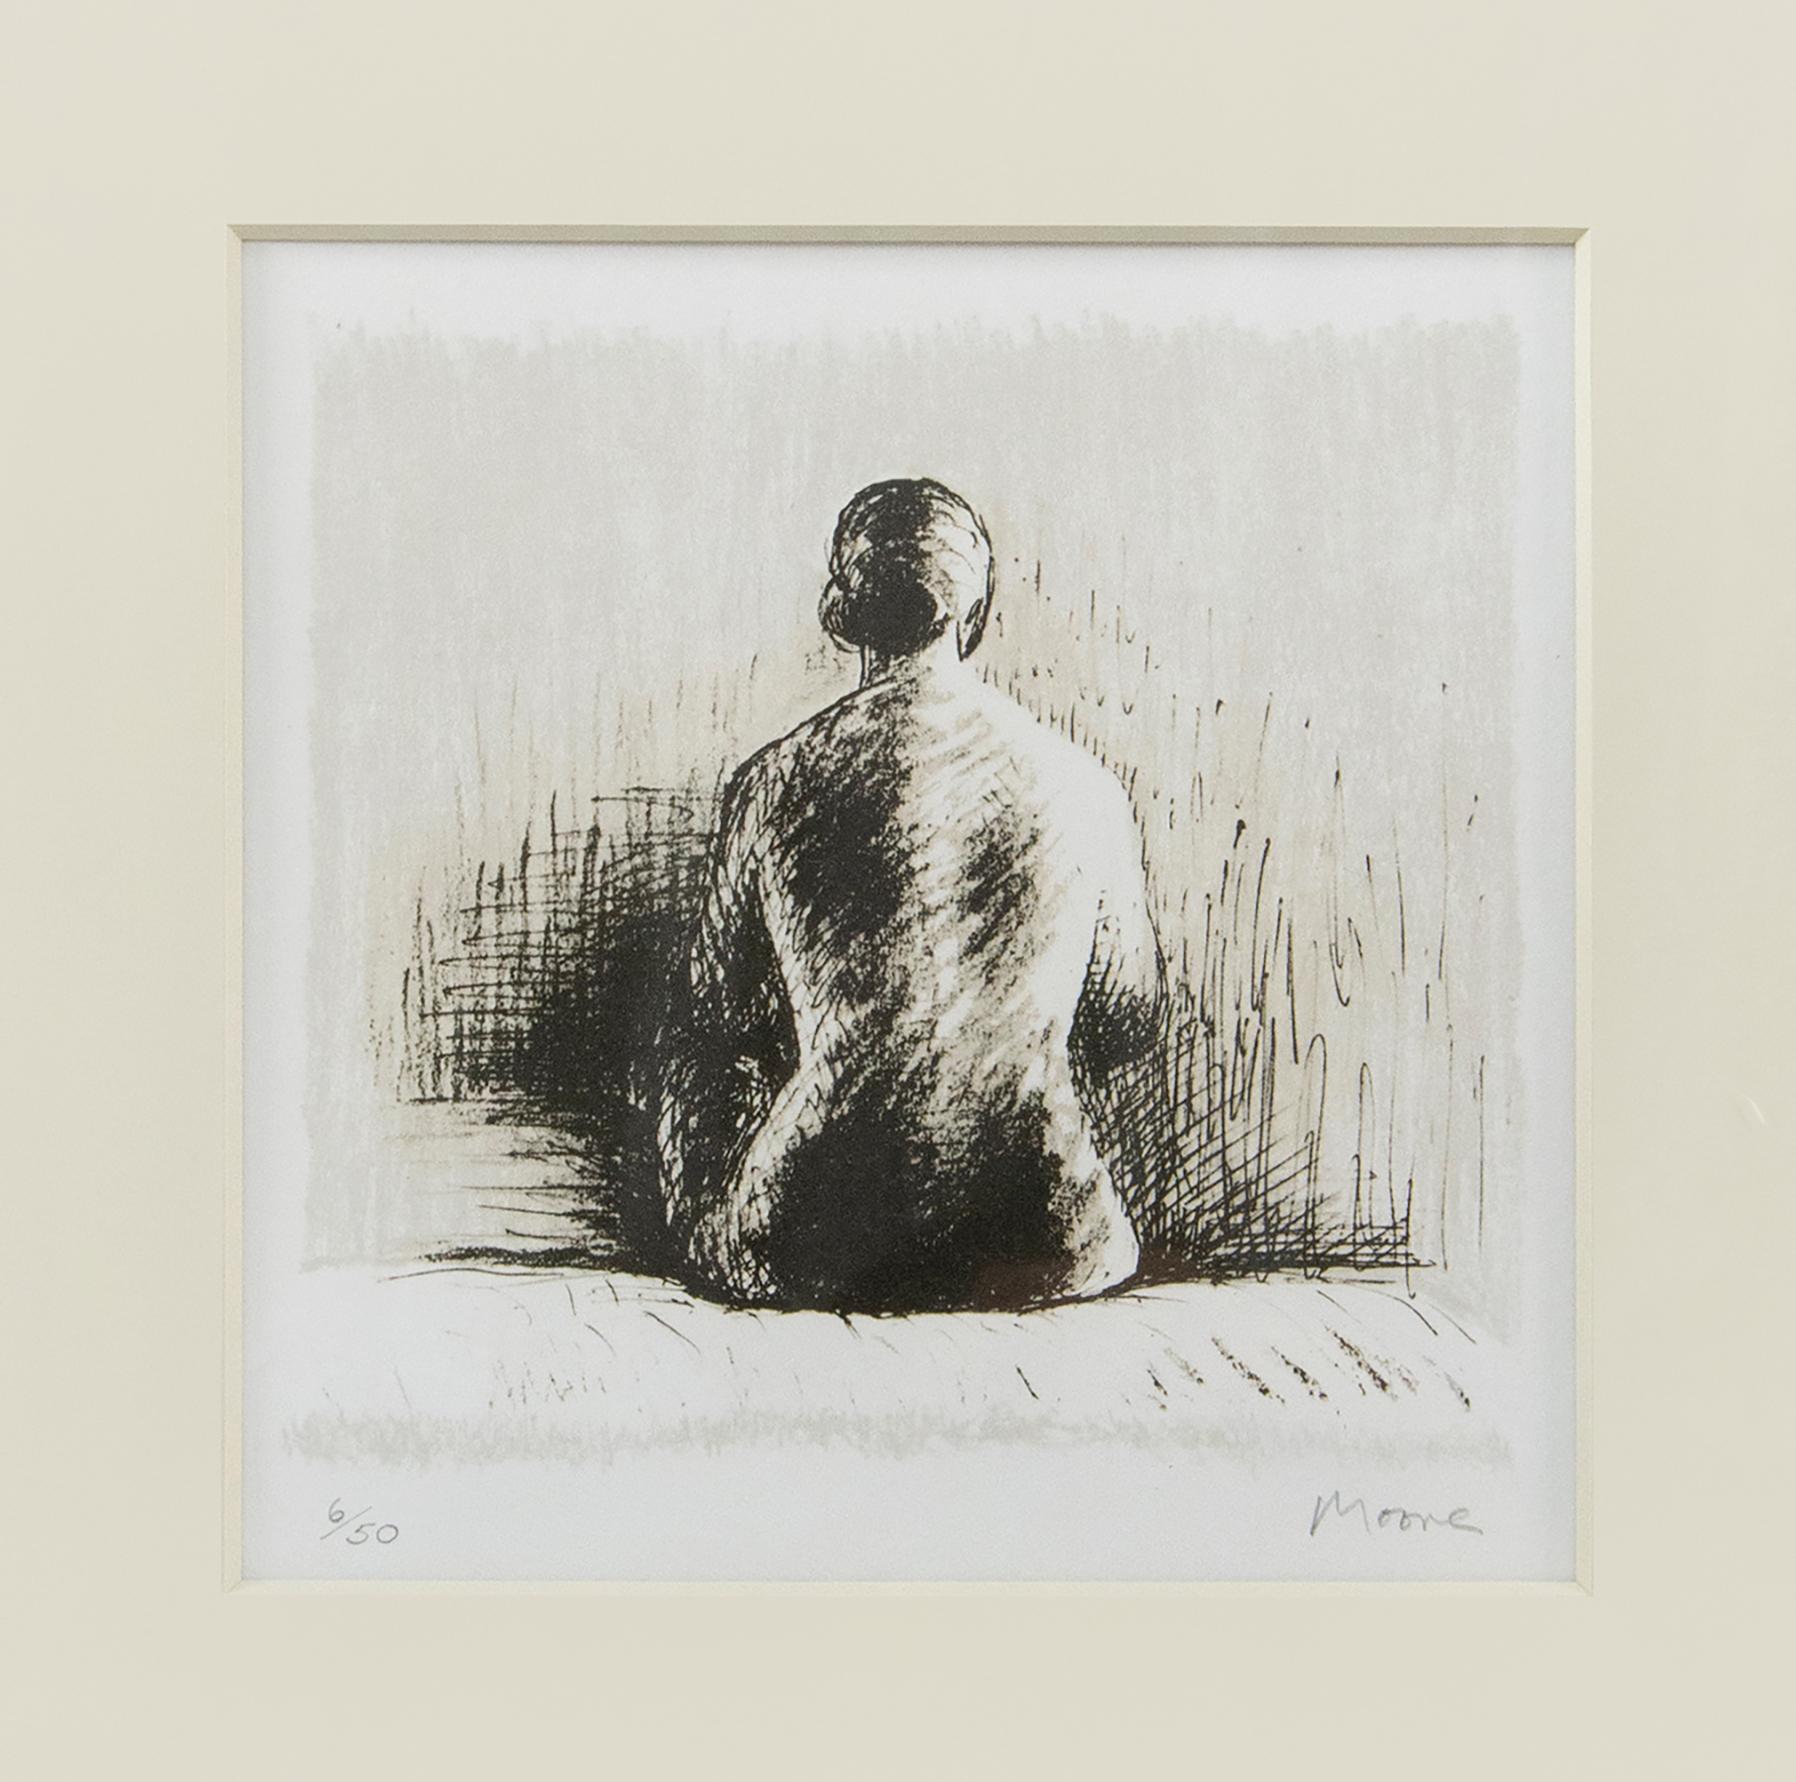 Lithograph in colours, 1974, signed in pencil and numbered from the edition of 50 (there were also ten artist's proof and ten hors commerce), published by Henry Moore, 41 x 34 cm. (16 x 13.4 in.) 